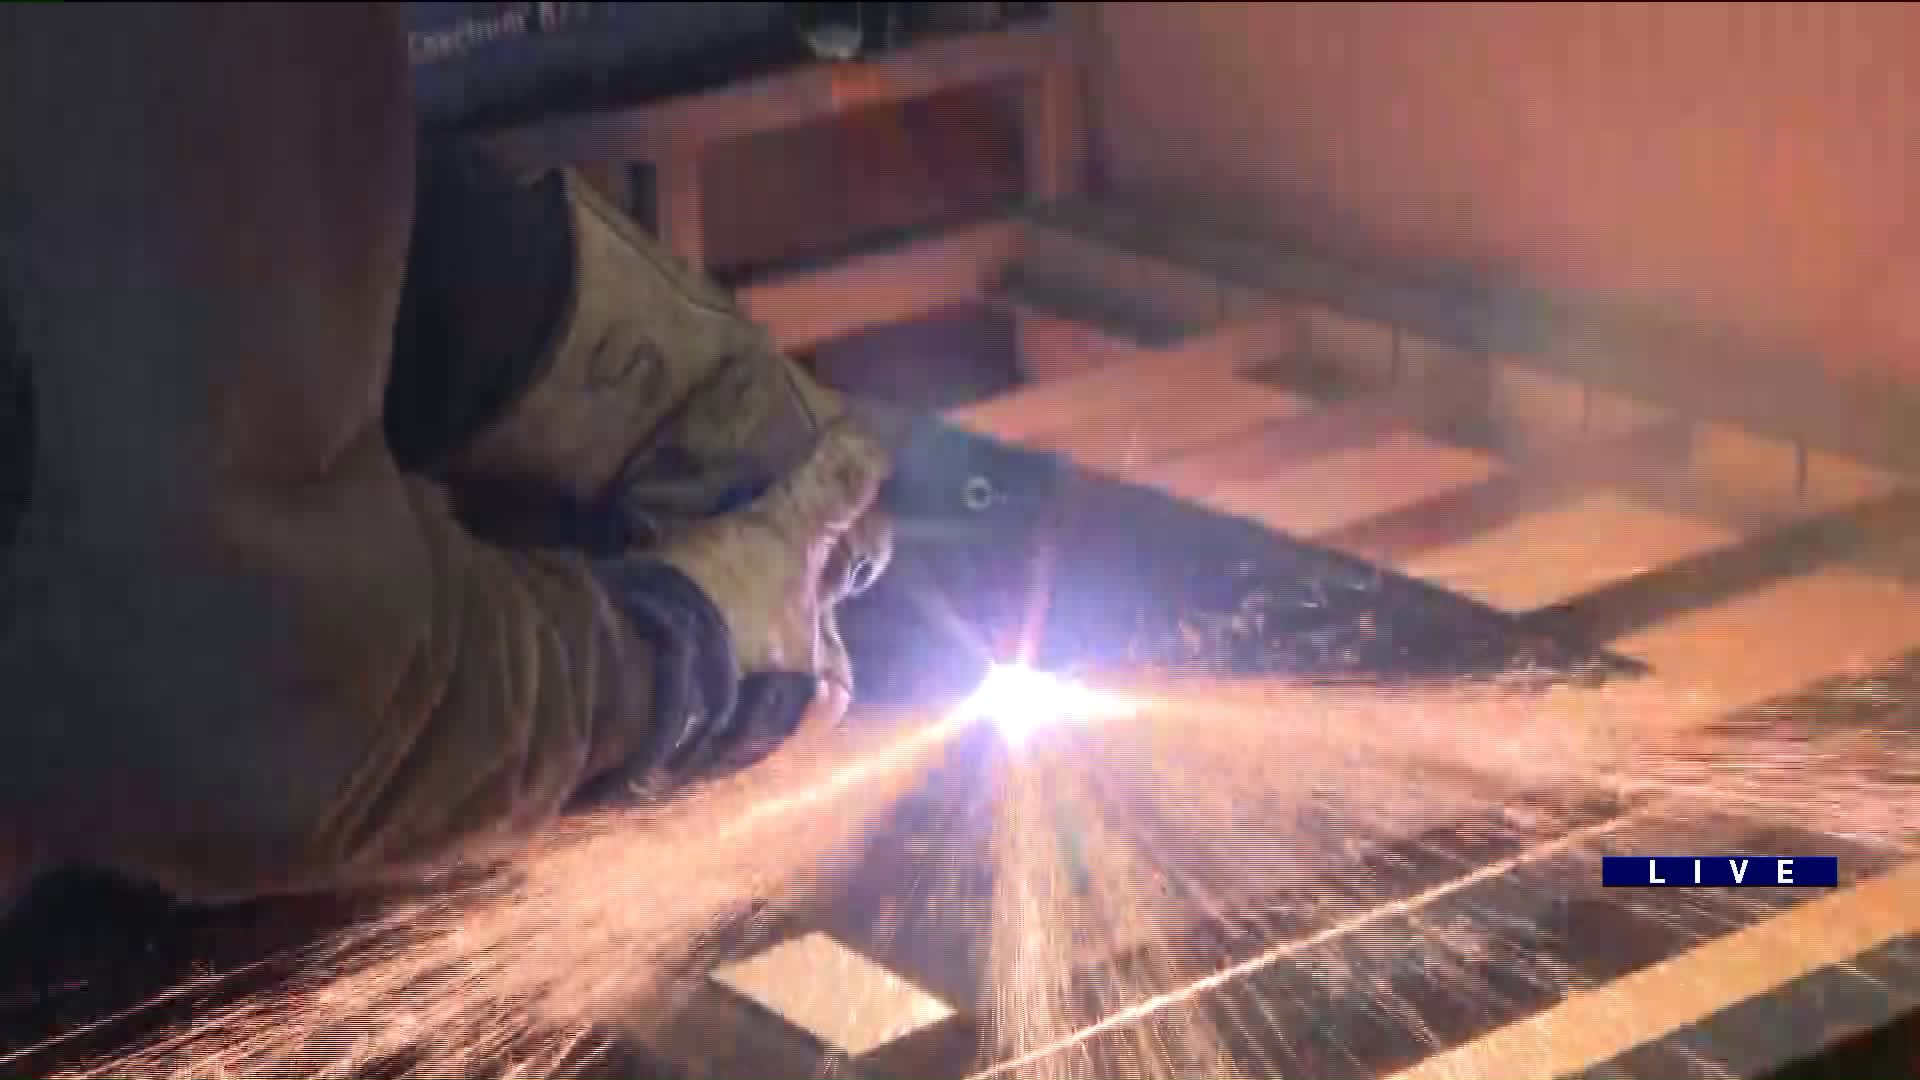 Around Town learns to weld at Arc Academy